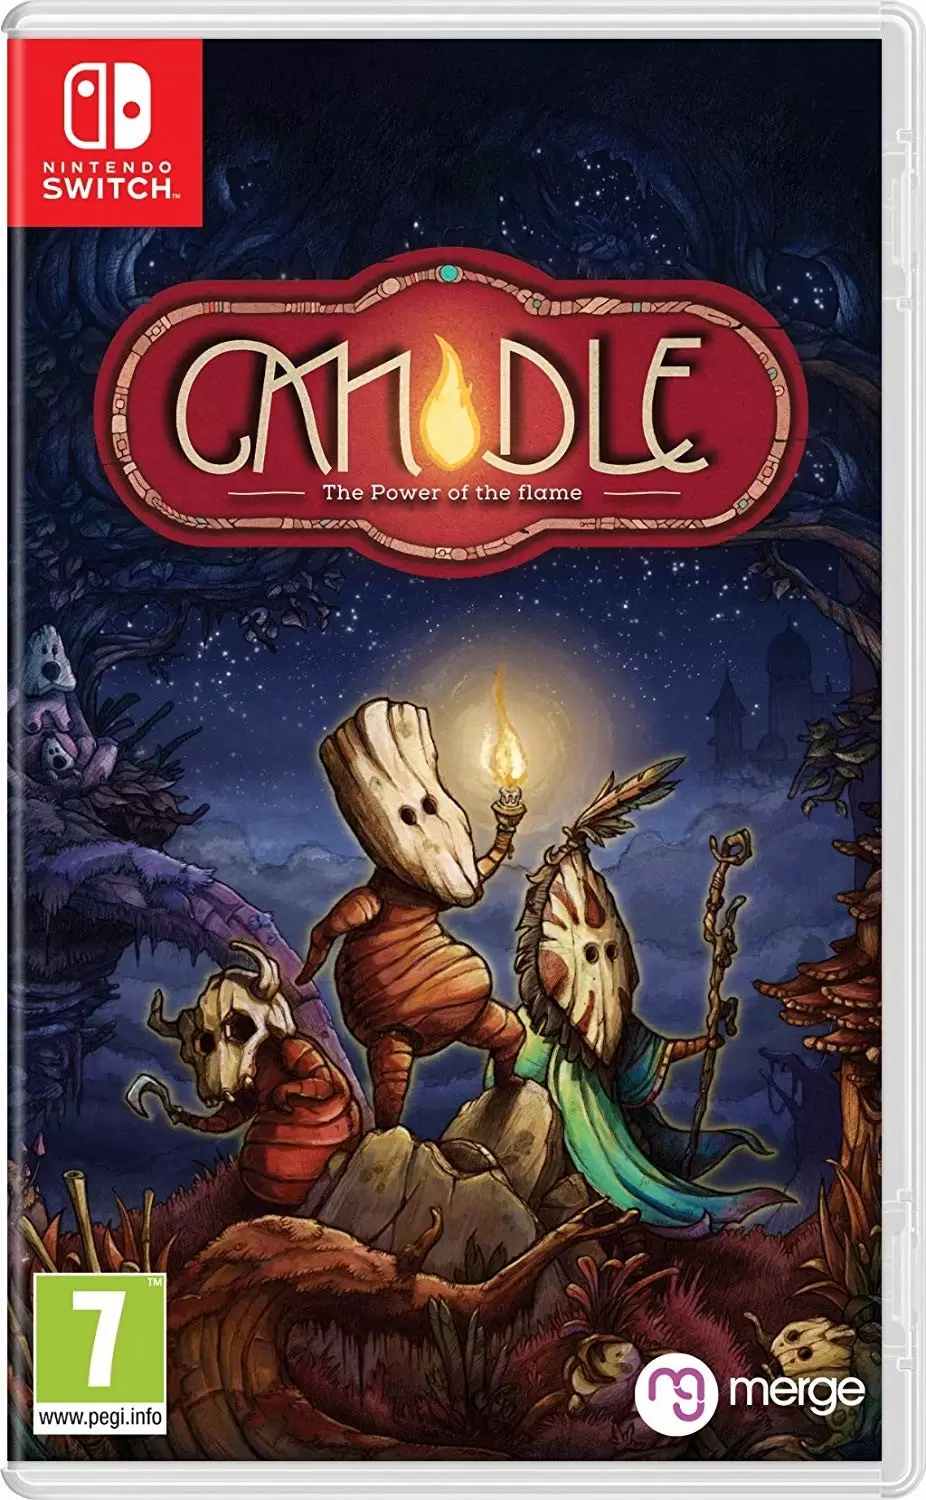 Nintendo Switch Games - Candle The Power of the Flame